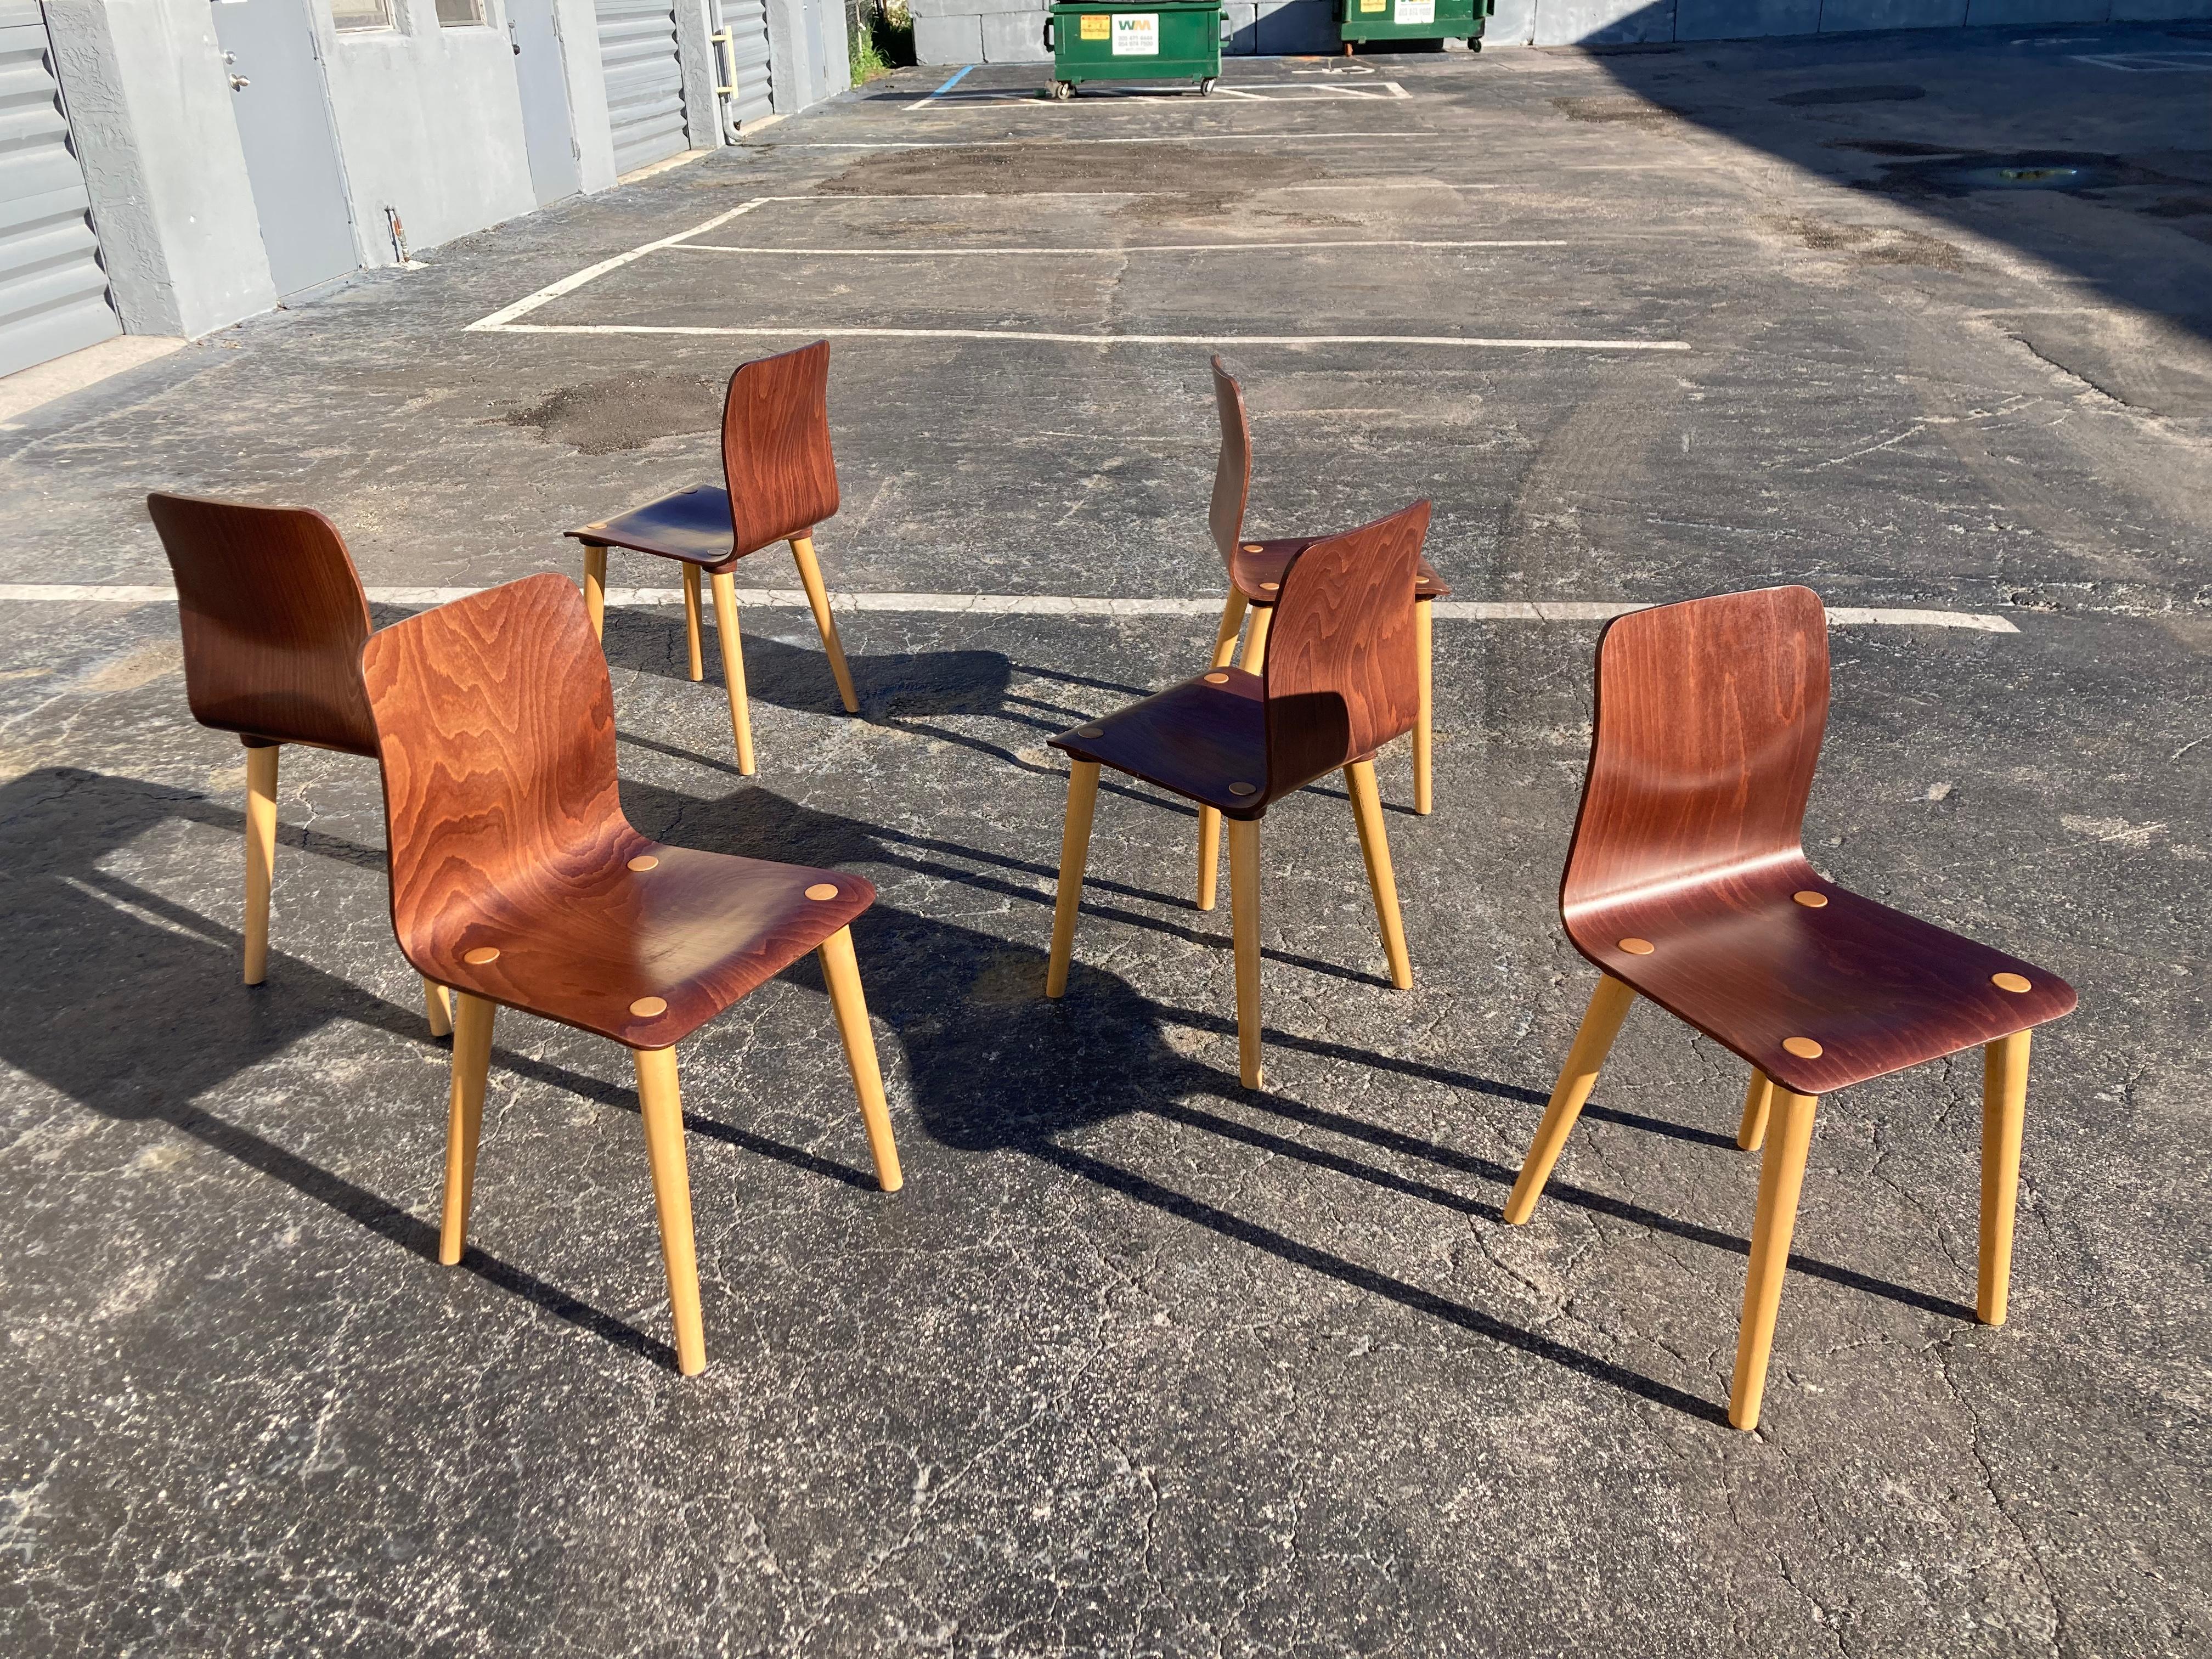  Set of Six Malmo Dining Chairs by Michal Riabic for Ton, Bentwood.
Ready for a new home.